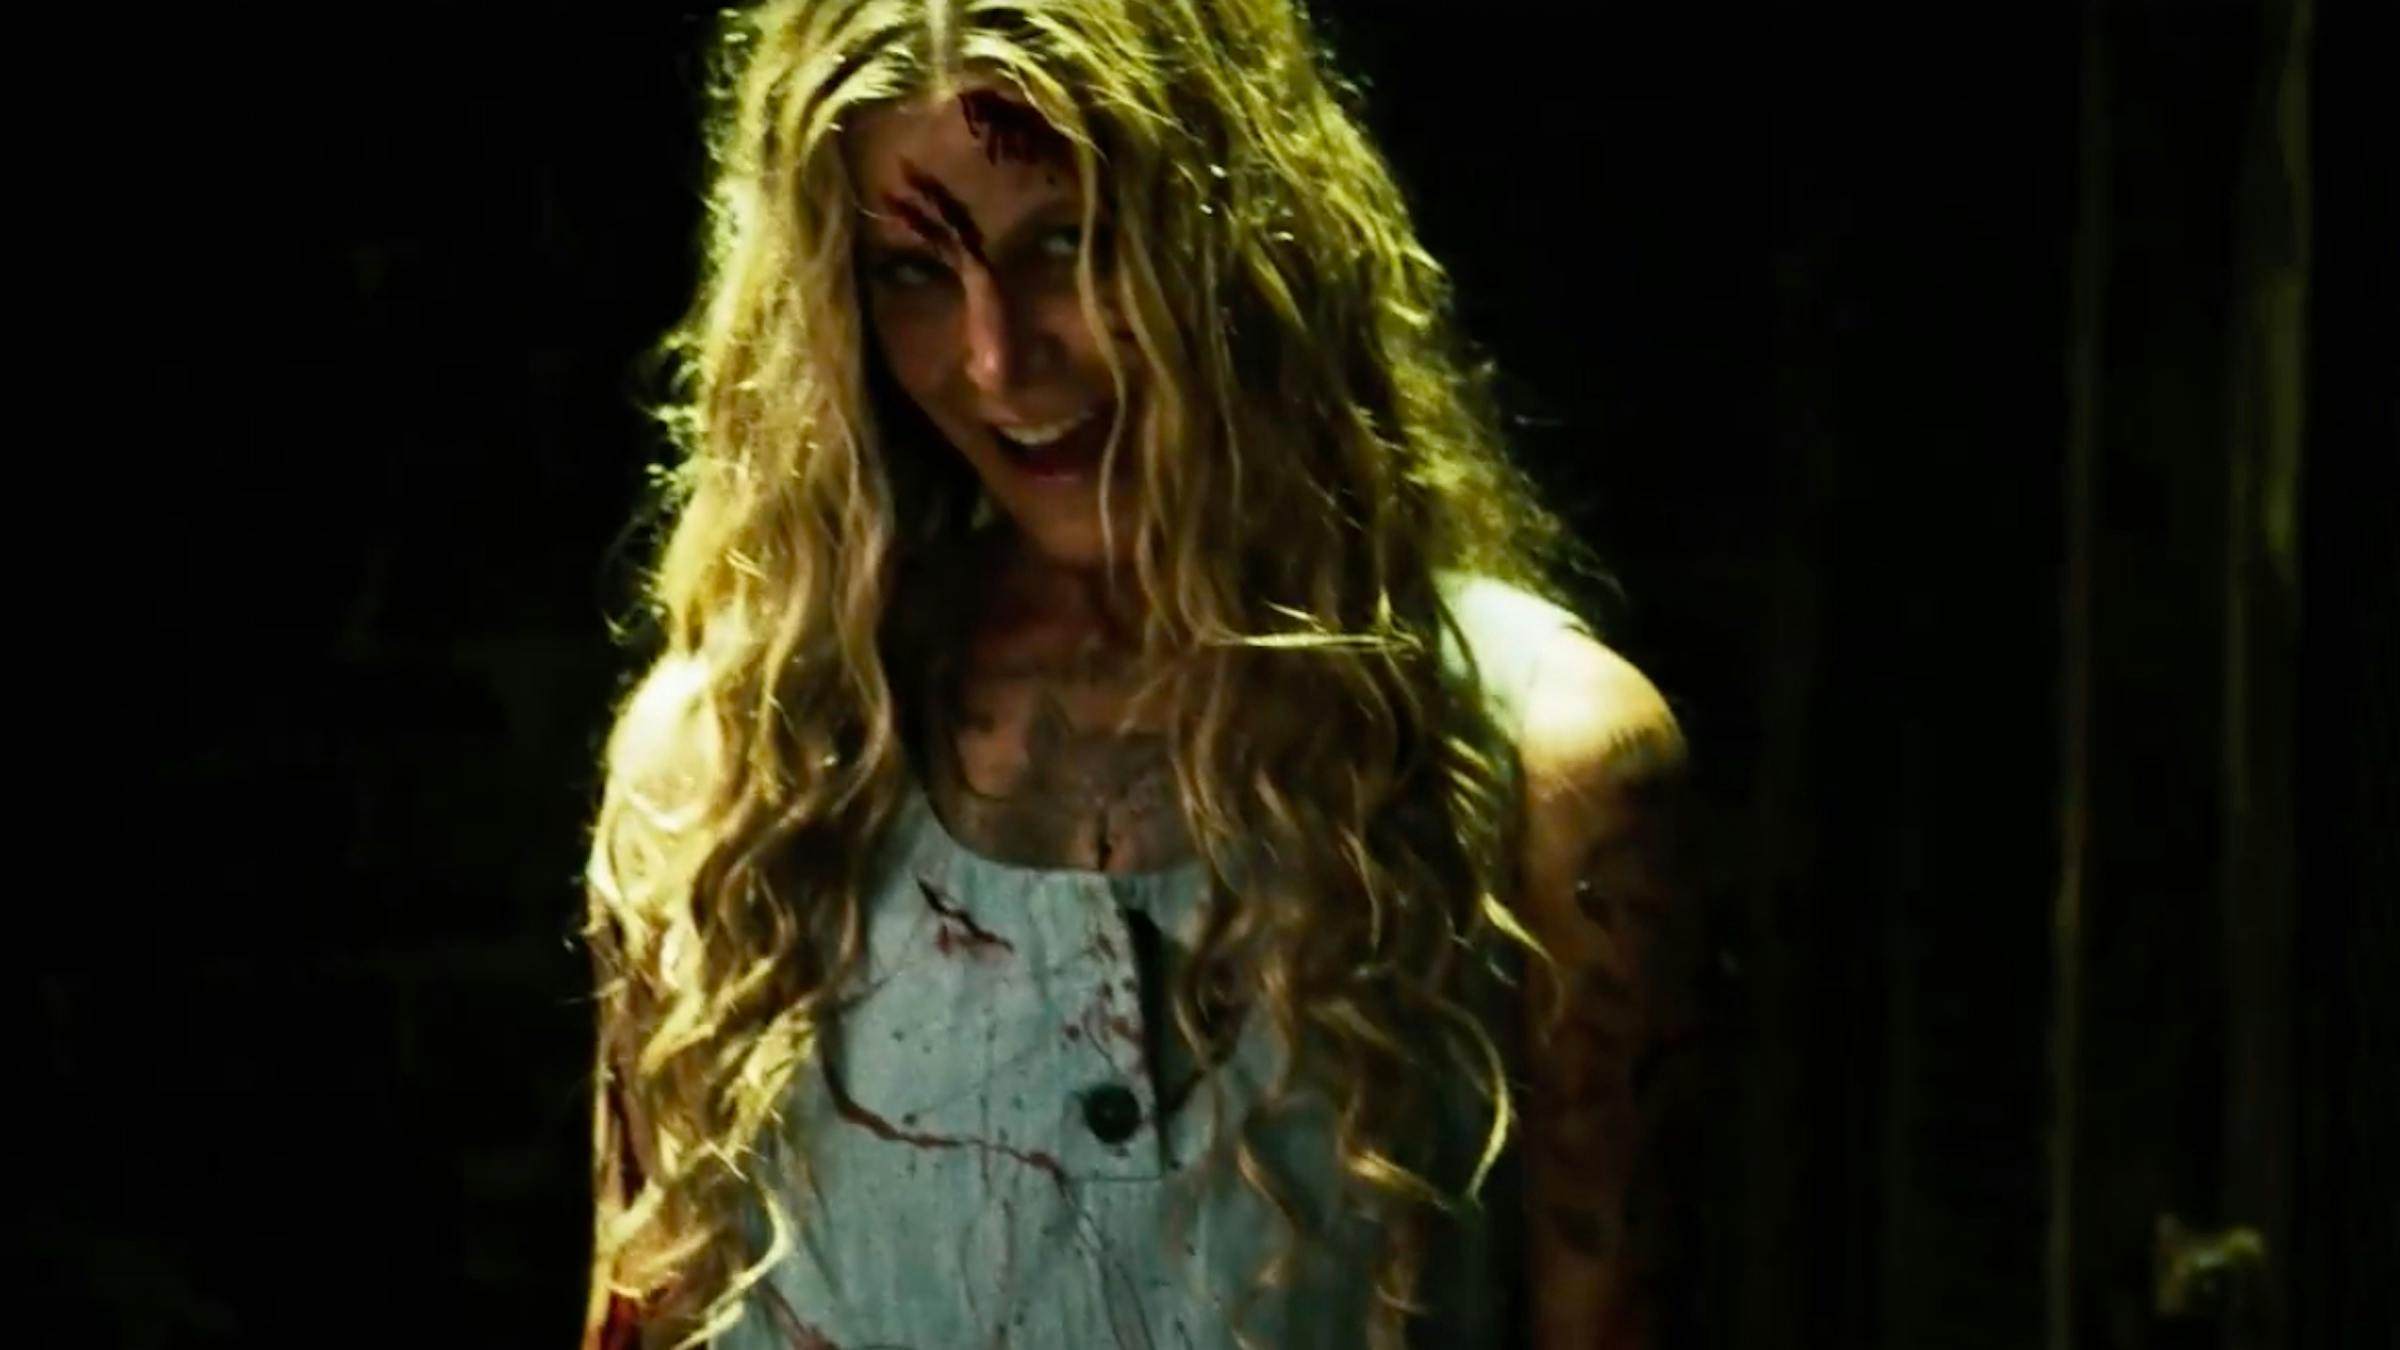 Rob Zombie's 3 From Hell Made $1.92 Million In Theaters, Will Return For One More Night